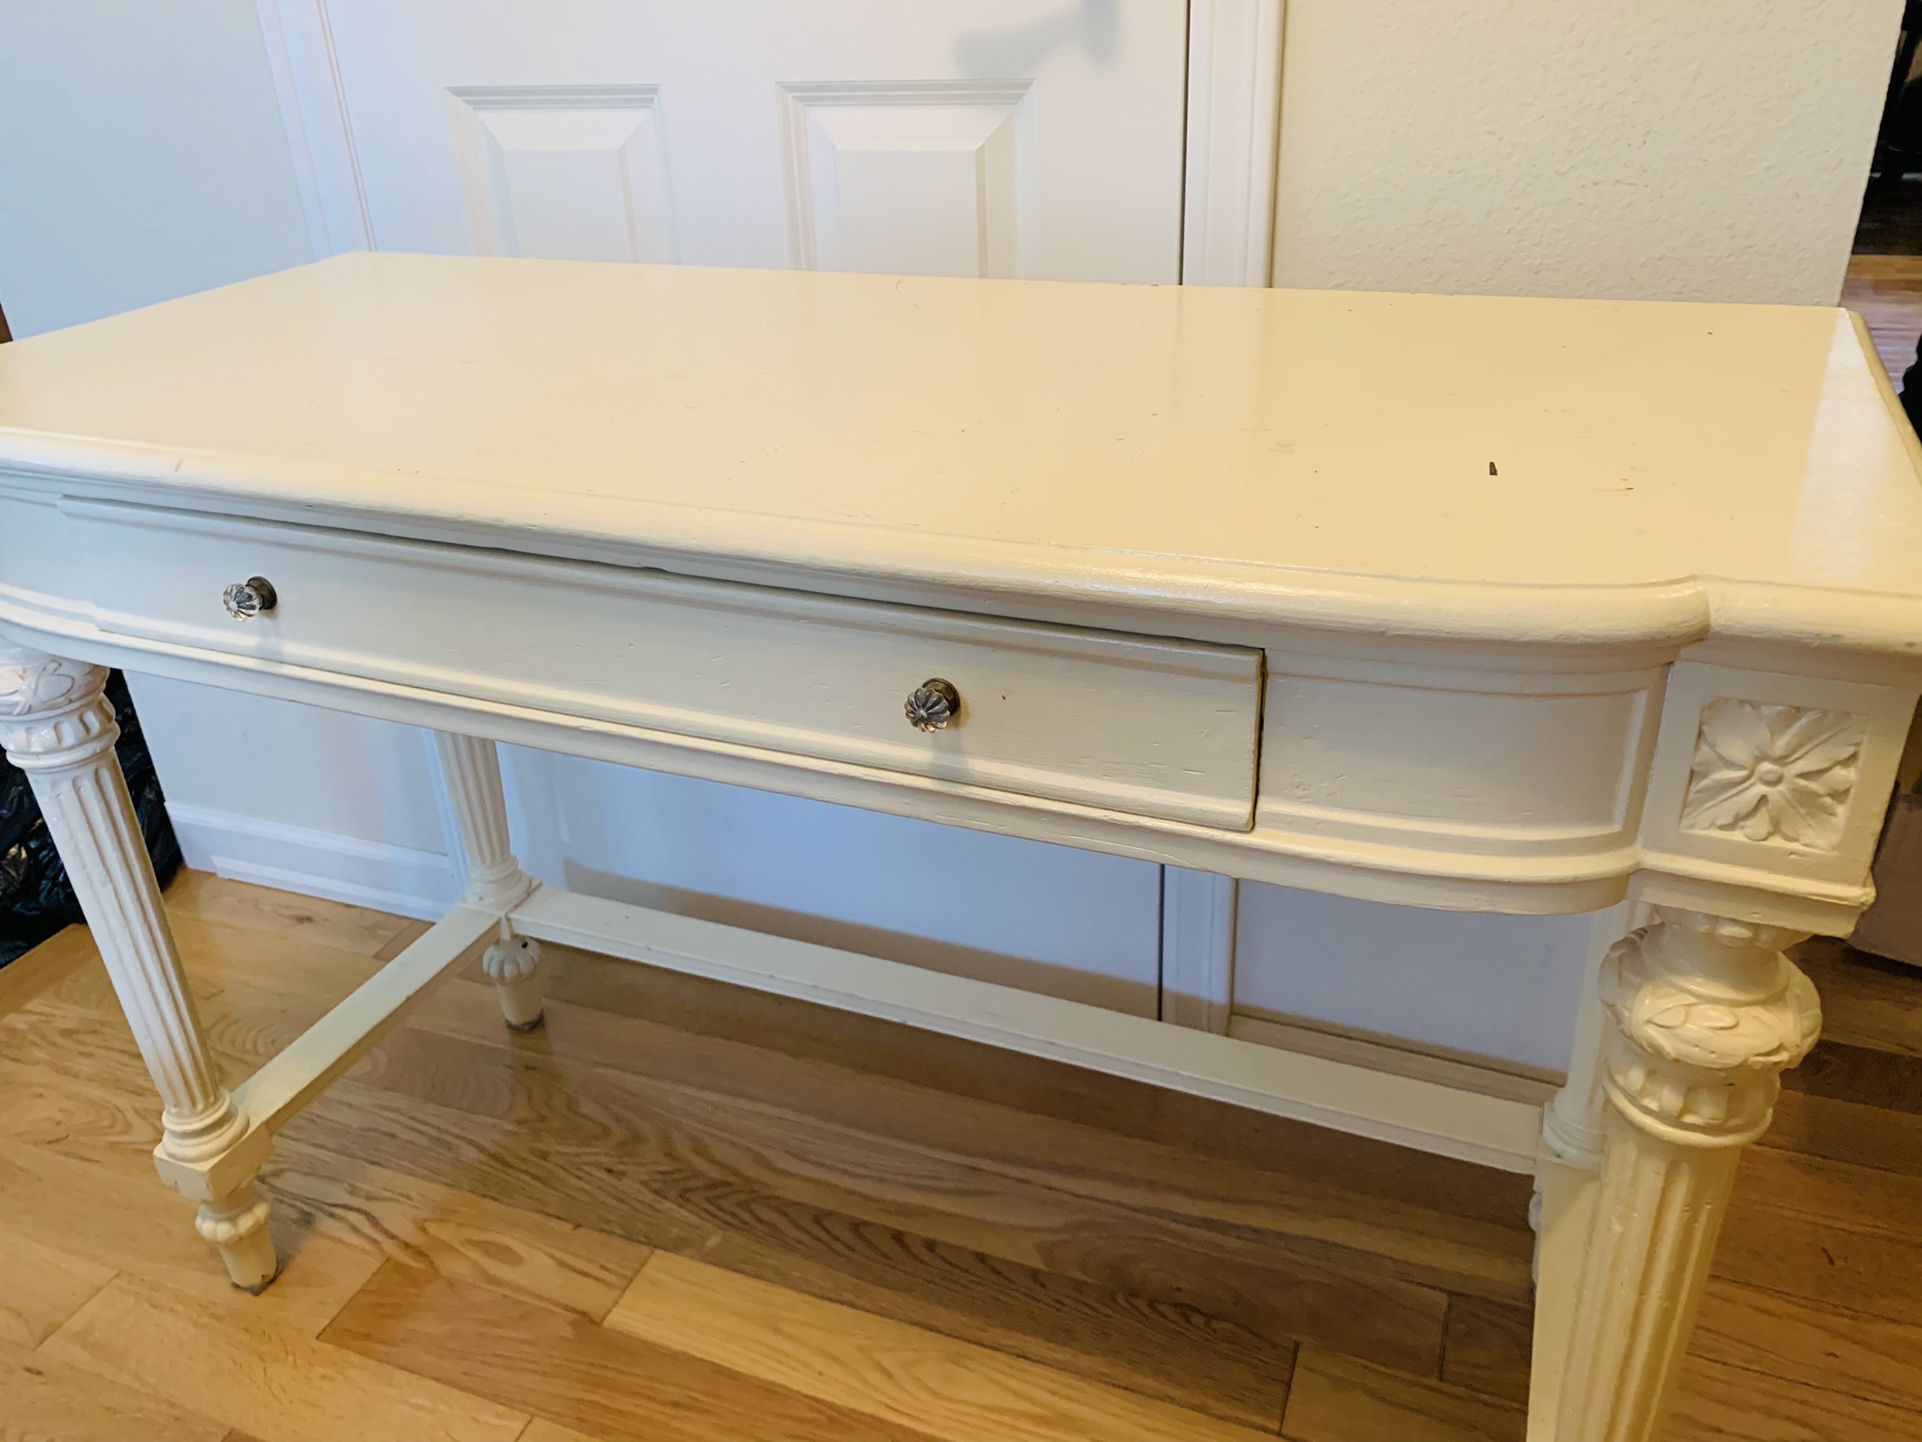 Painted Antique Writing Desk